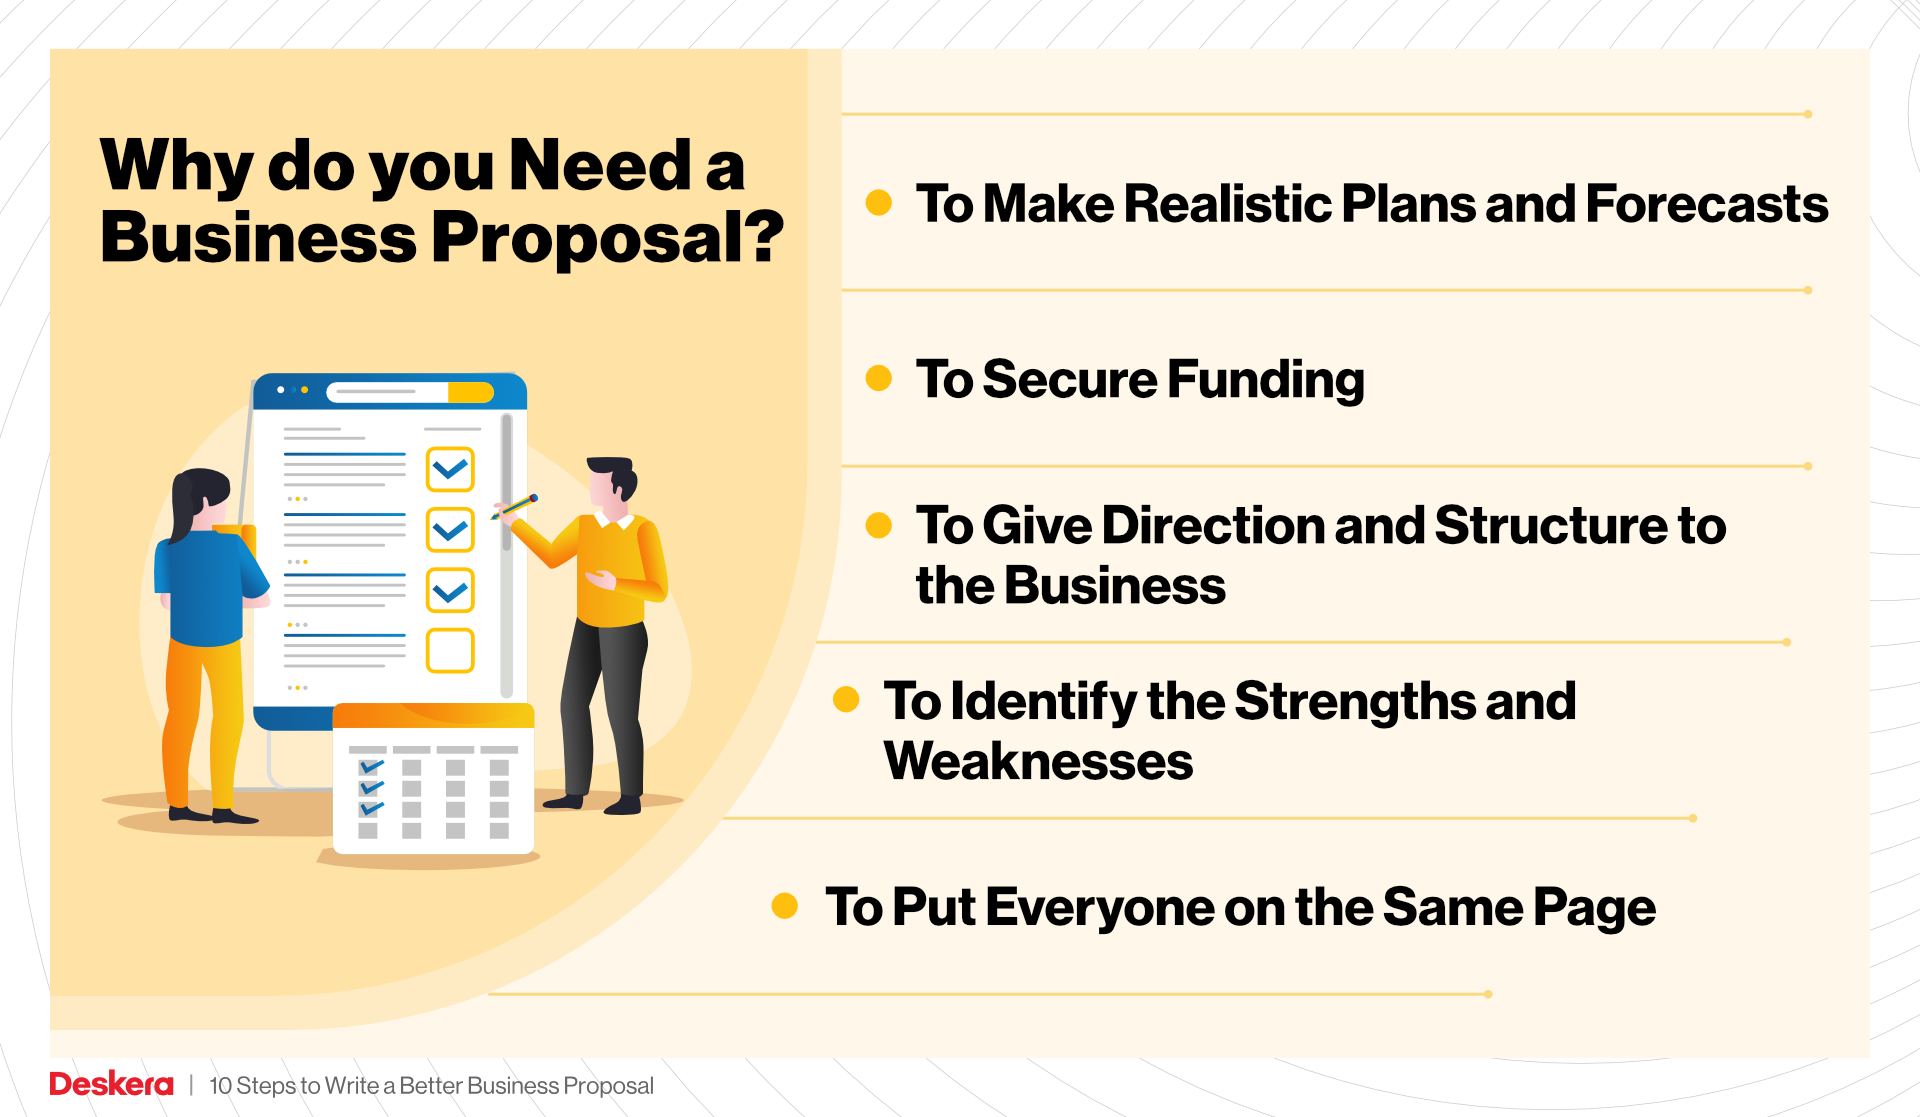 https://www.deskera.com/blog/content/images/2022/09/2022-W39-Blog-Post_why-need-business-proposal.png